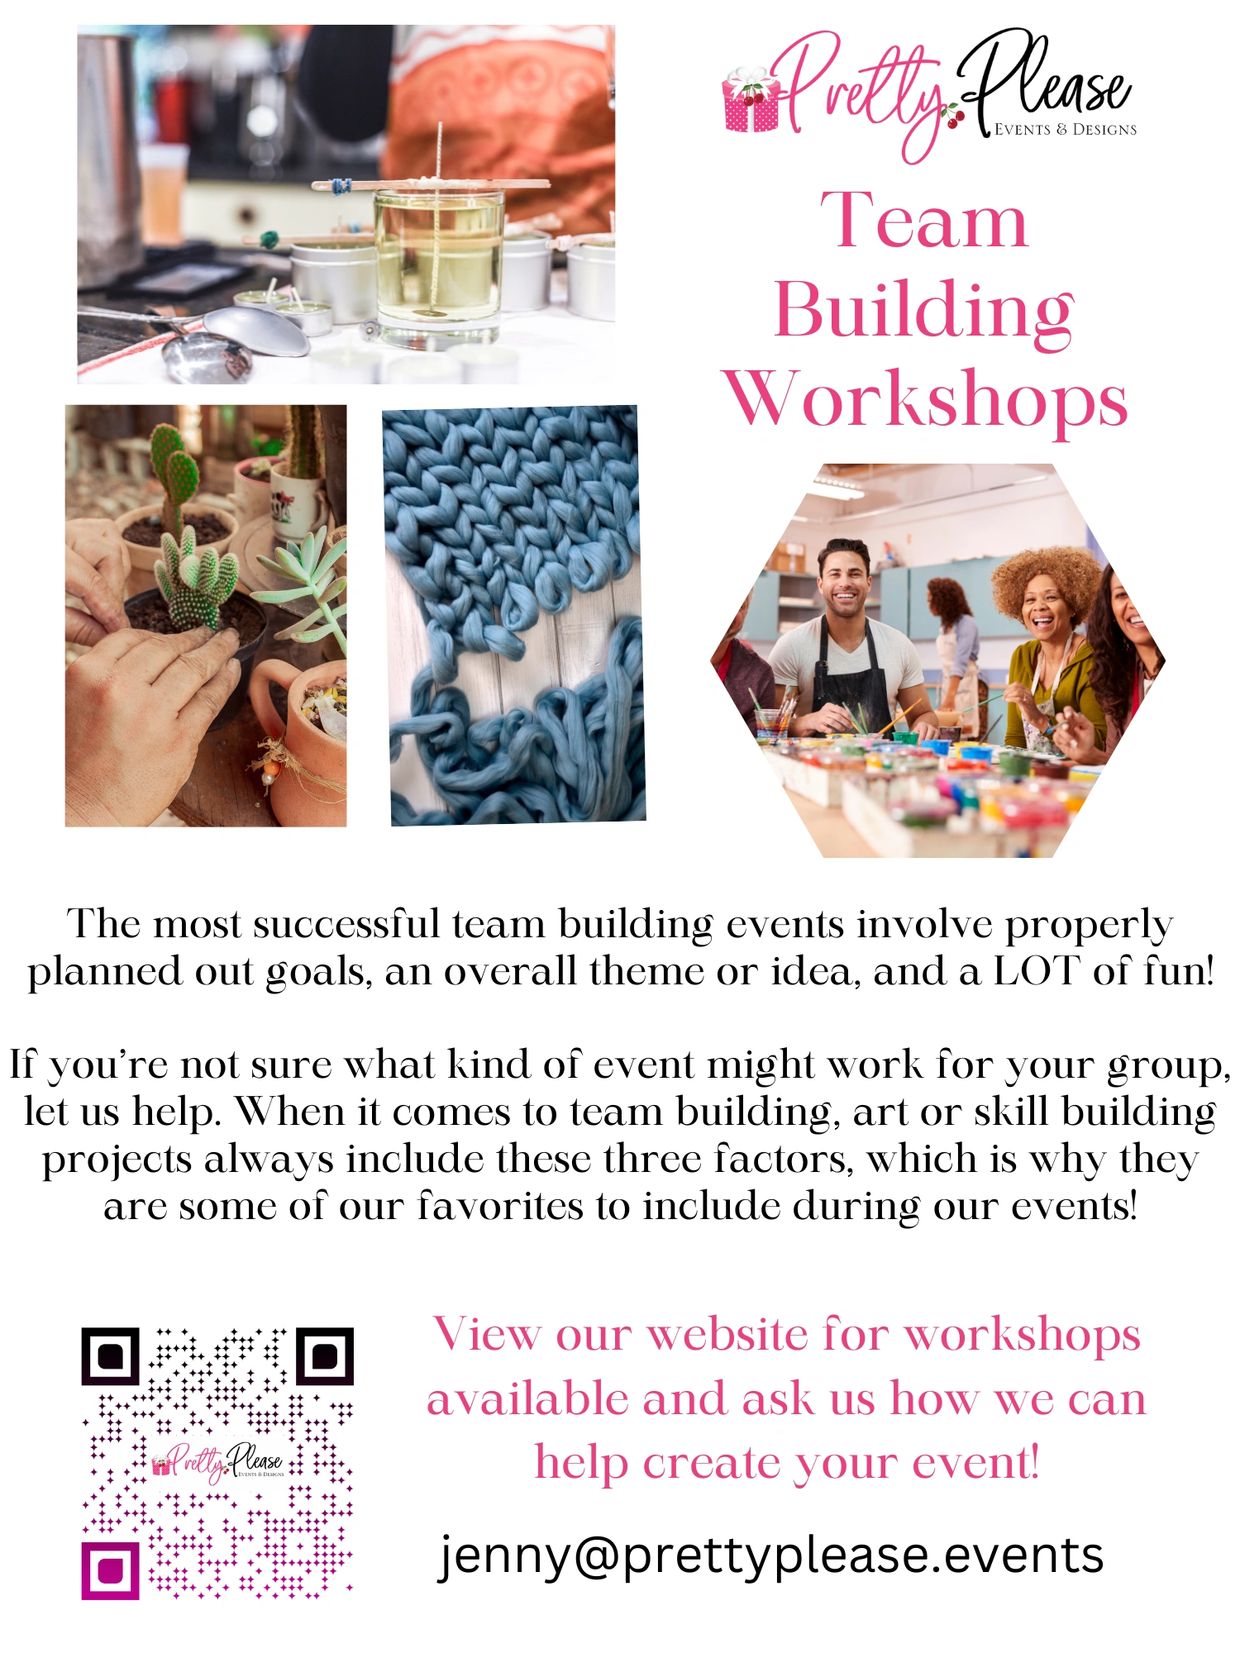 Let us help you create the perfect team building workshop or event for your organization.  